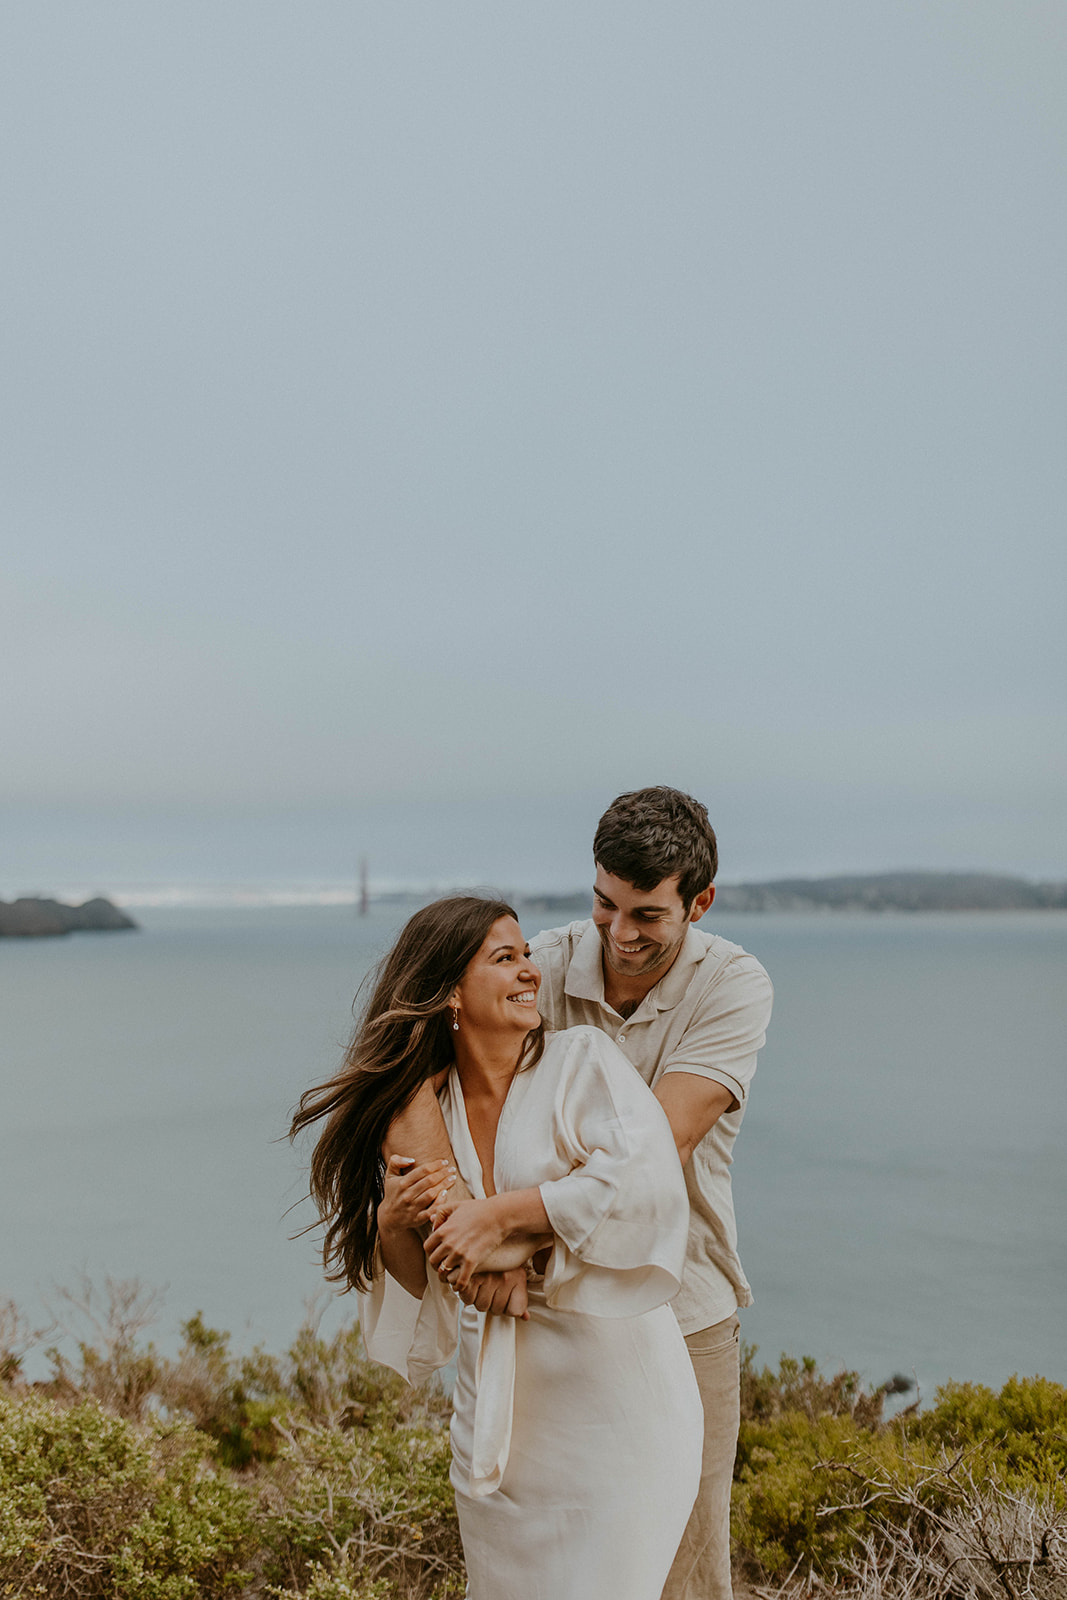 winter engagement photos in san francisco, california capture right on the coastline of the pacific ocean. photos taken by Codi Baer Photograpy